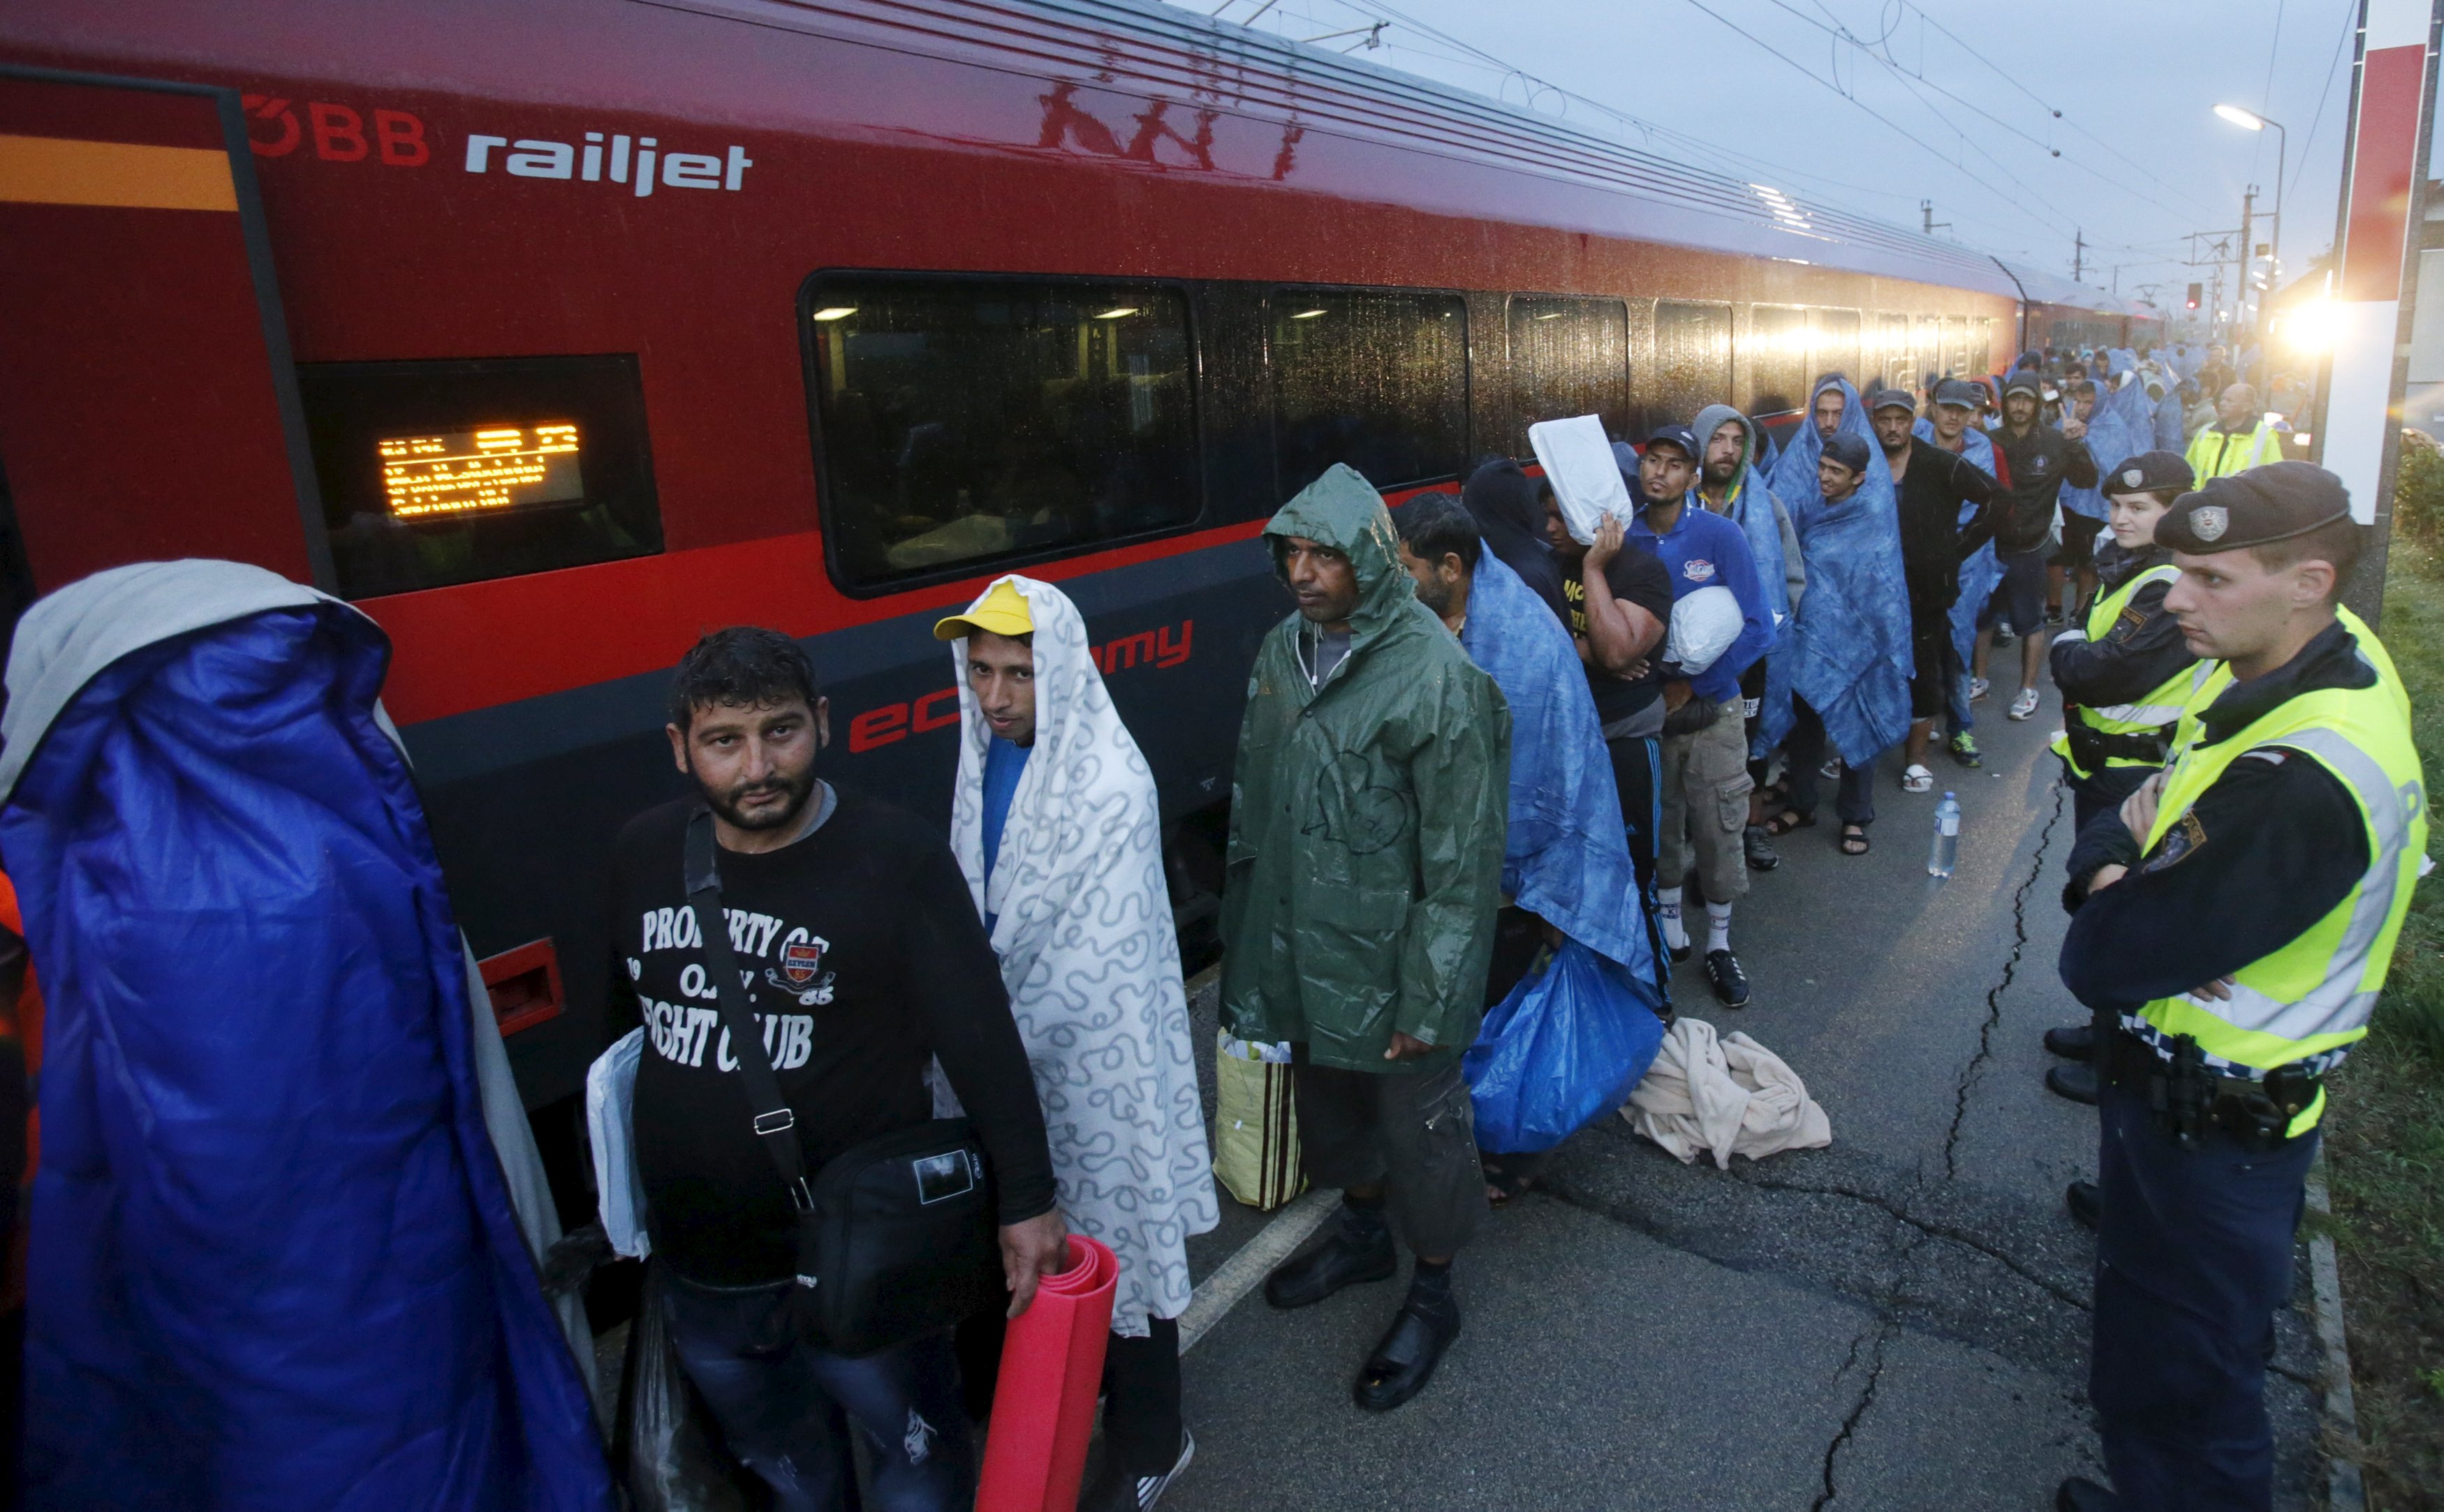 Migrants arrive at the Austrian train station of Nickelsdorf to board trains to Germany, September 5, 2015. Hundreds of exhausted migrants streamed into Austria on Saturday, reaching the border on buses provided by an overwhelmed Hungarian government that gave up trying to hold back crowds that had set out on foot for western Europe.   REUTERS/Heinz-Peter Bader